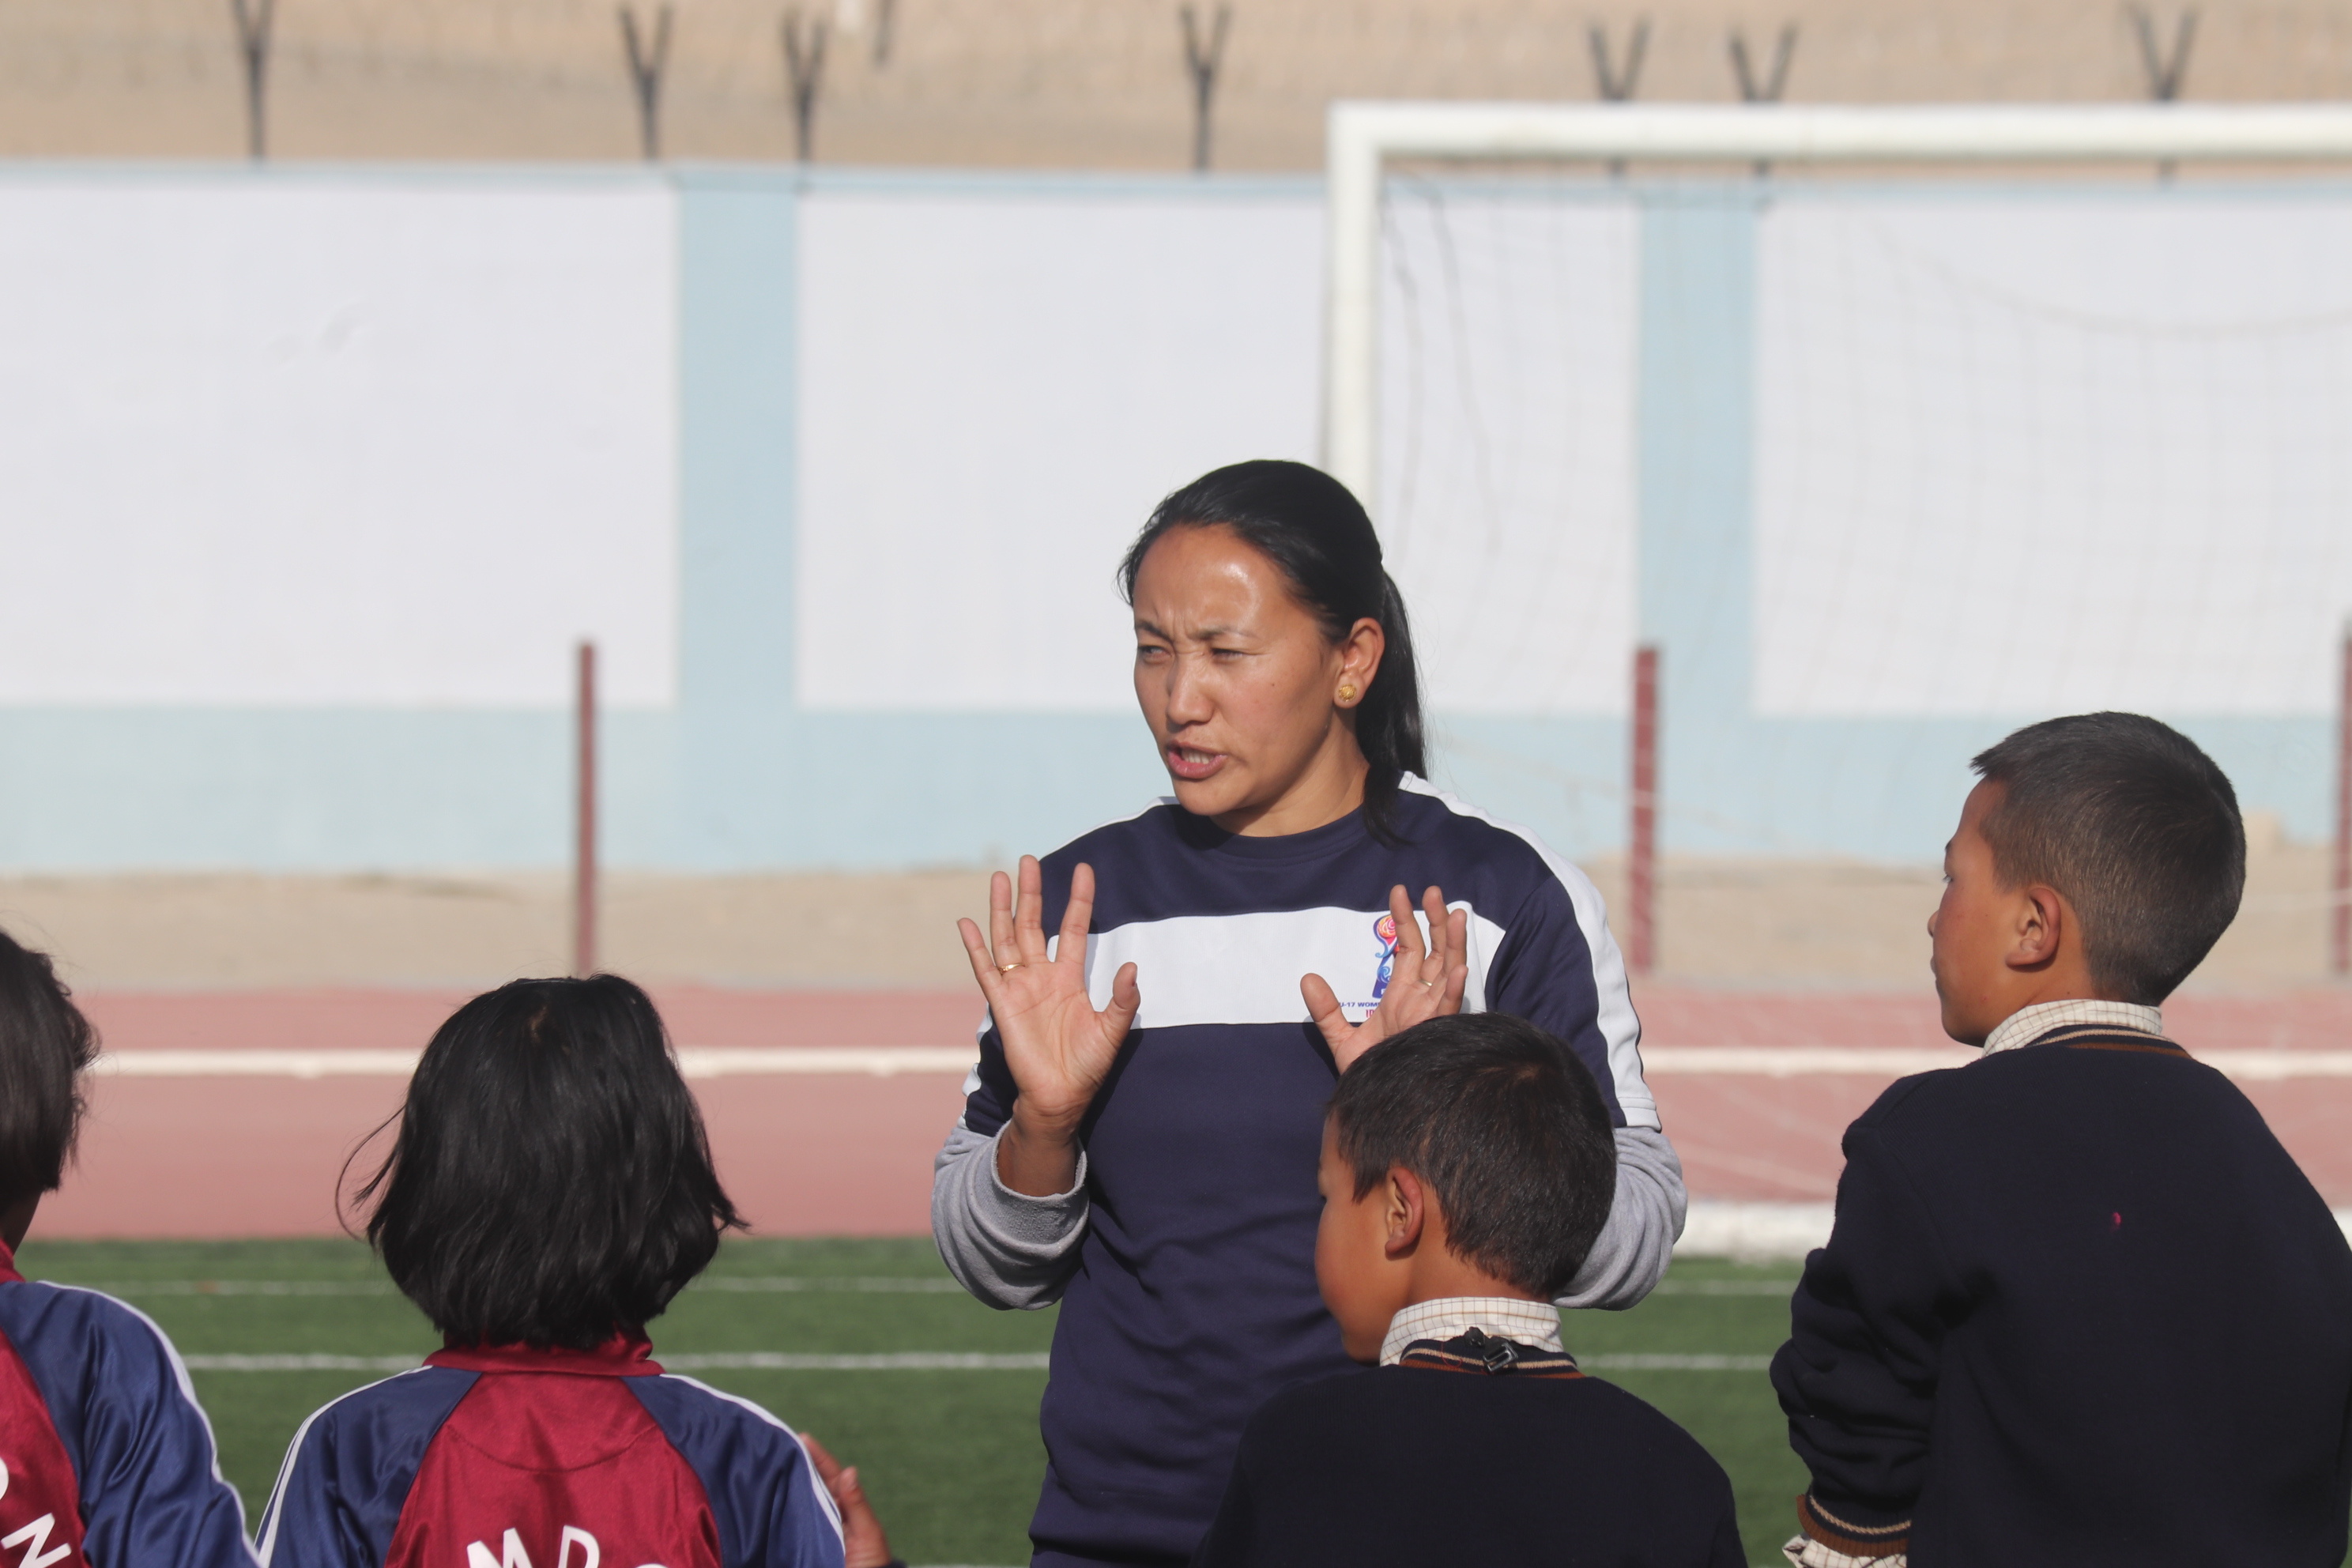 Game-changing FIFA U-17 Women’s World Cup India 2022™ legacy initiative concludes in Ladakh